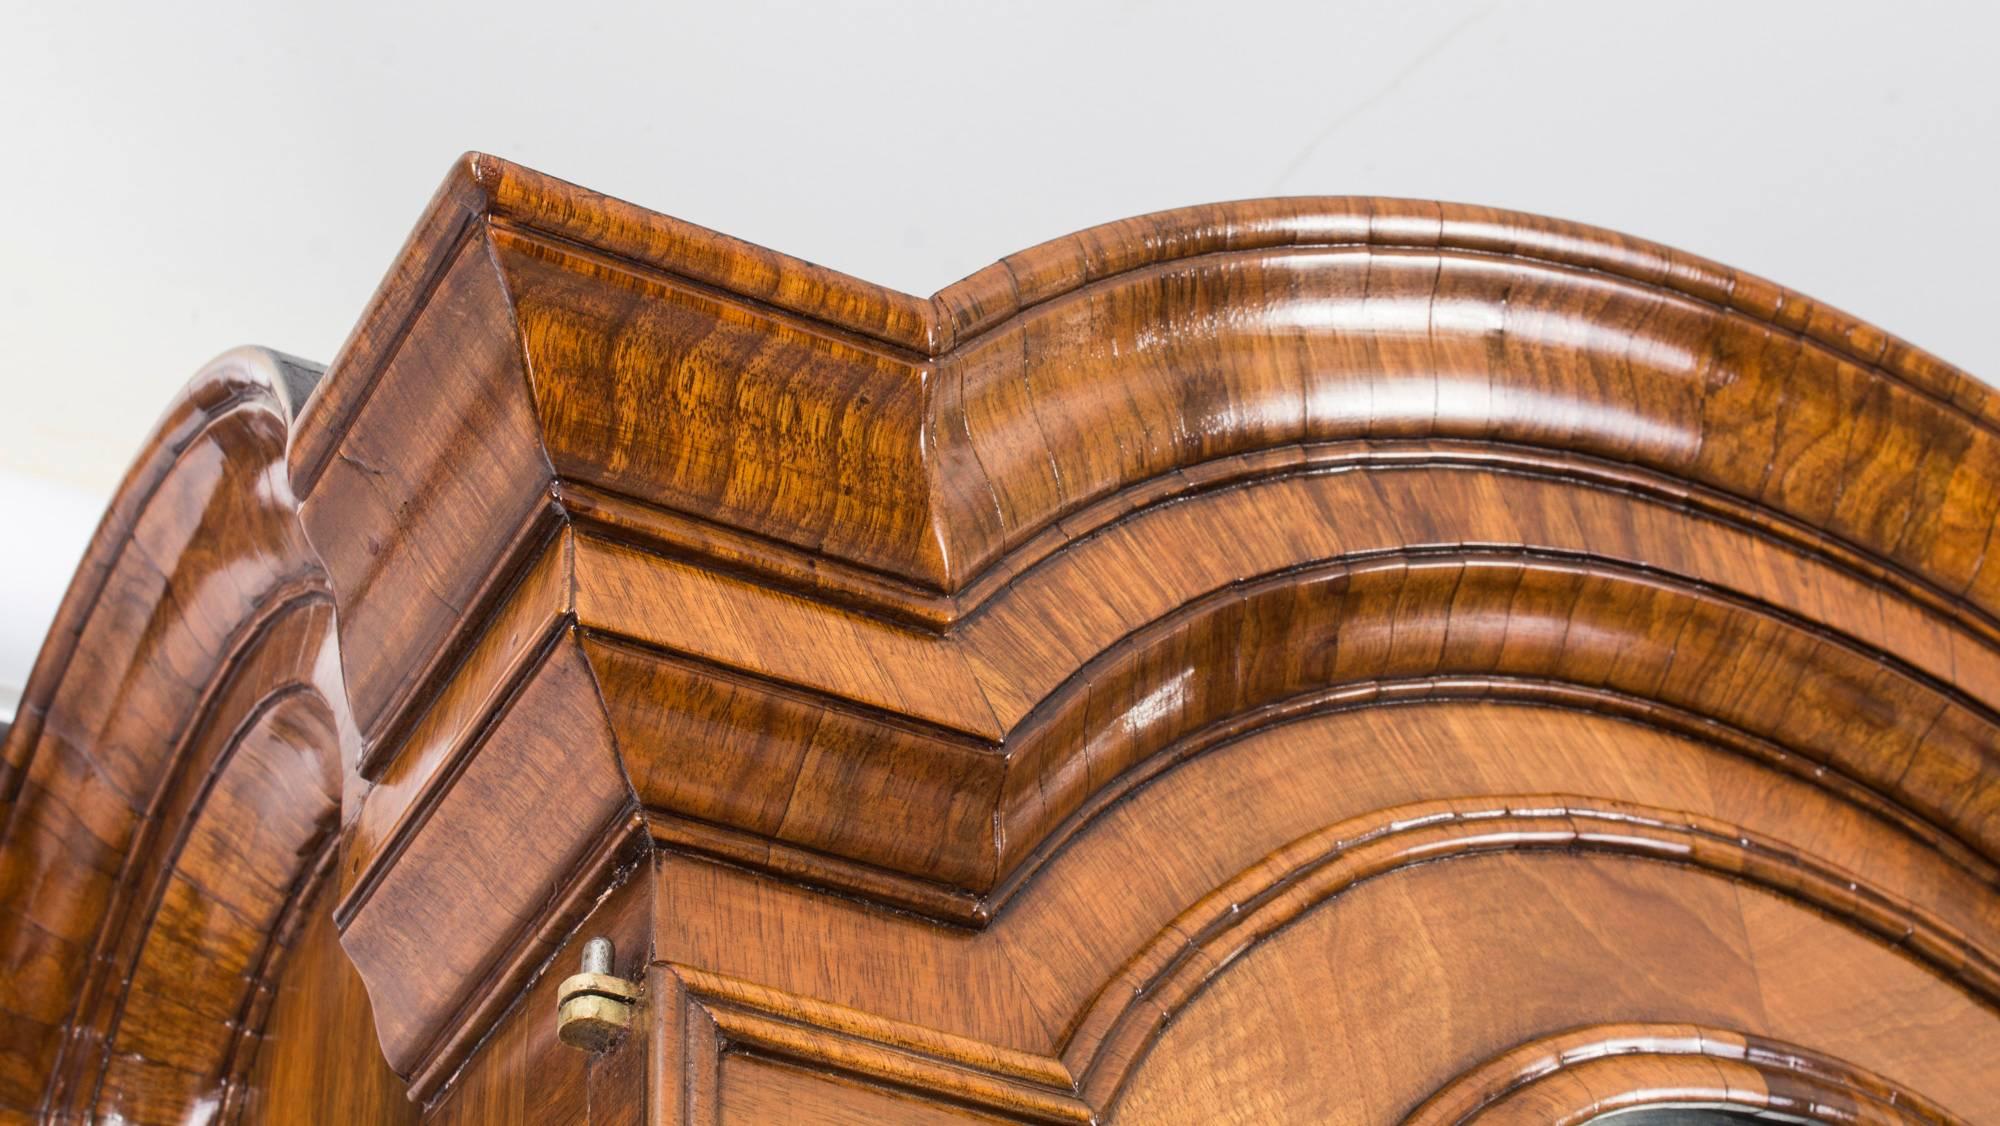 Here we have a beautiful antique Queen Anne double dome bureau bookcase in burr walnut and dated by our experts to have been made around 1720.

Although Queen Anne actually reigned from 1702 until her death in 1714, furniture made after that period